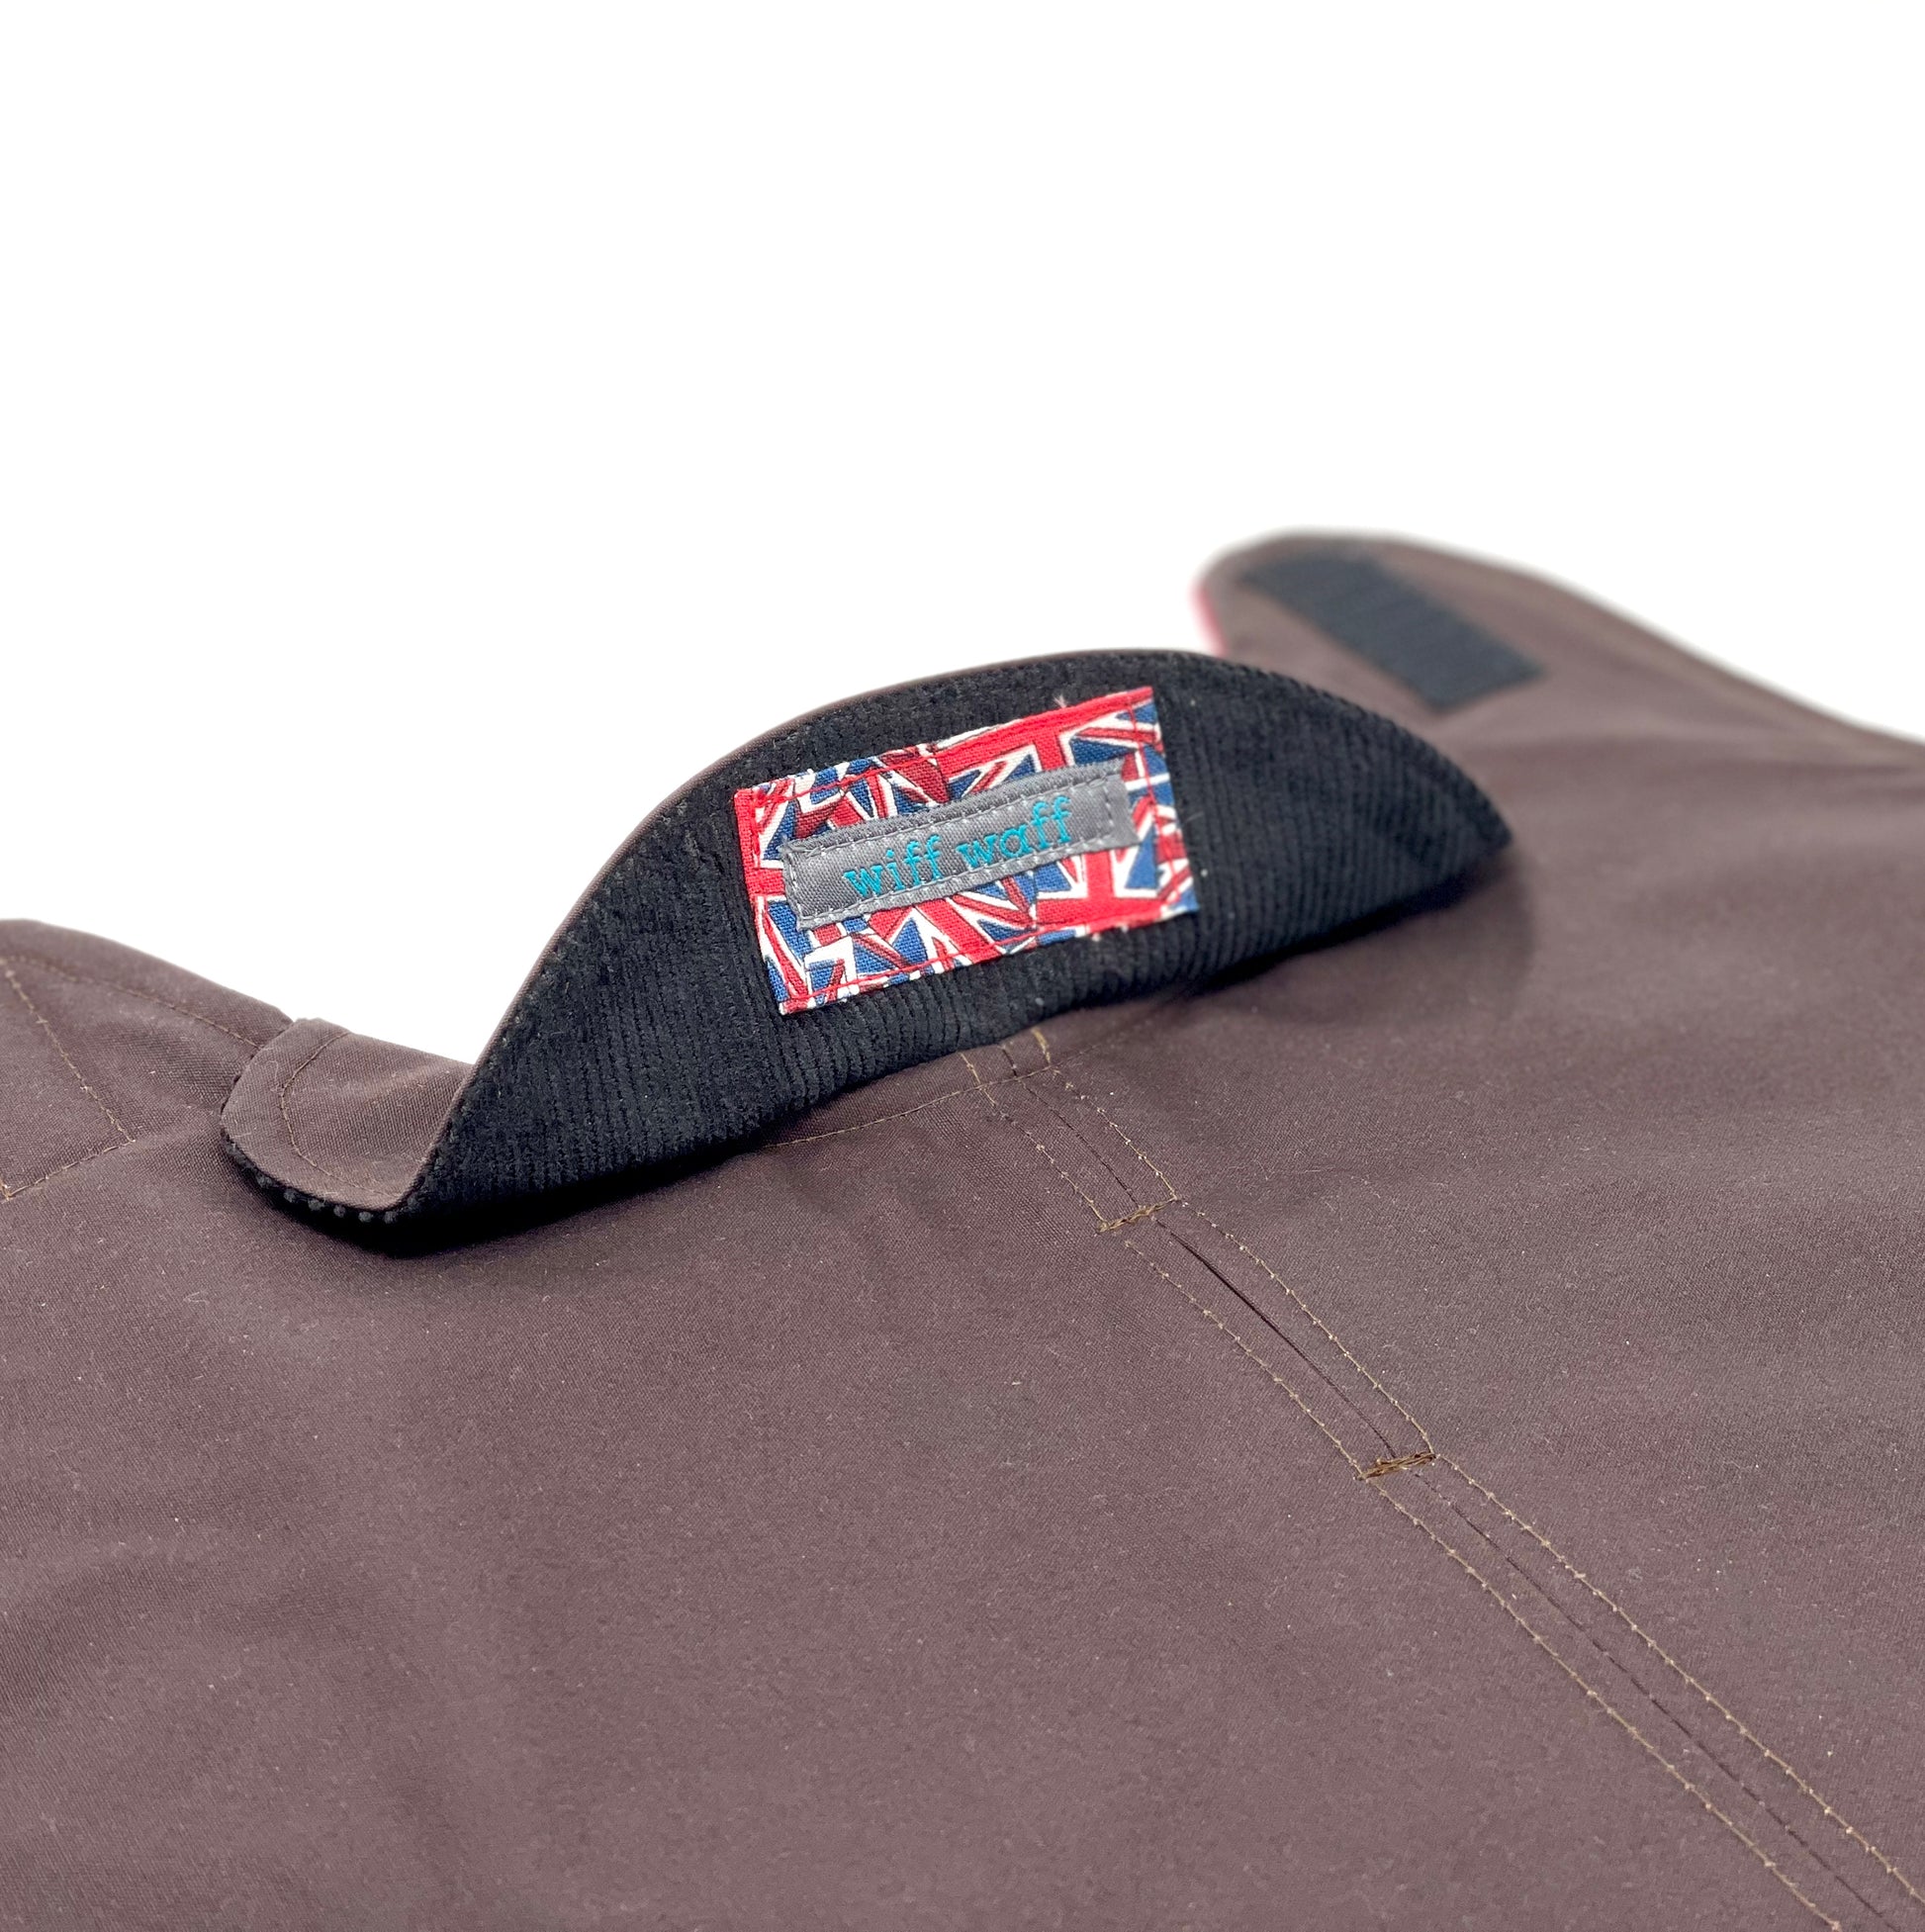 Chocolate brown dog coat collar which is folded up to show soft brown corduroy fabric with Wiff Waff logo stitched on to a piece of Union Jack fabric.